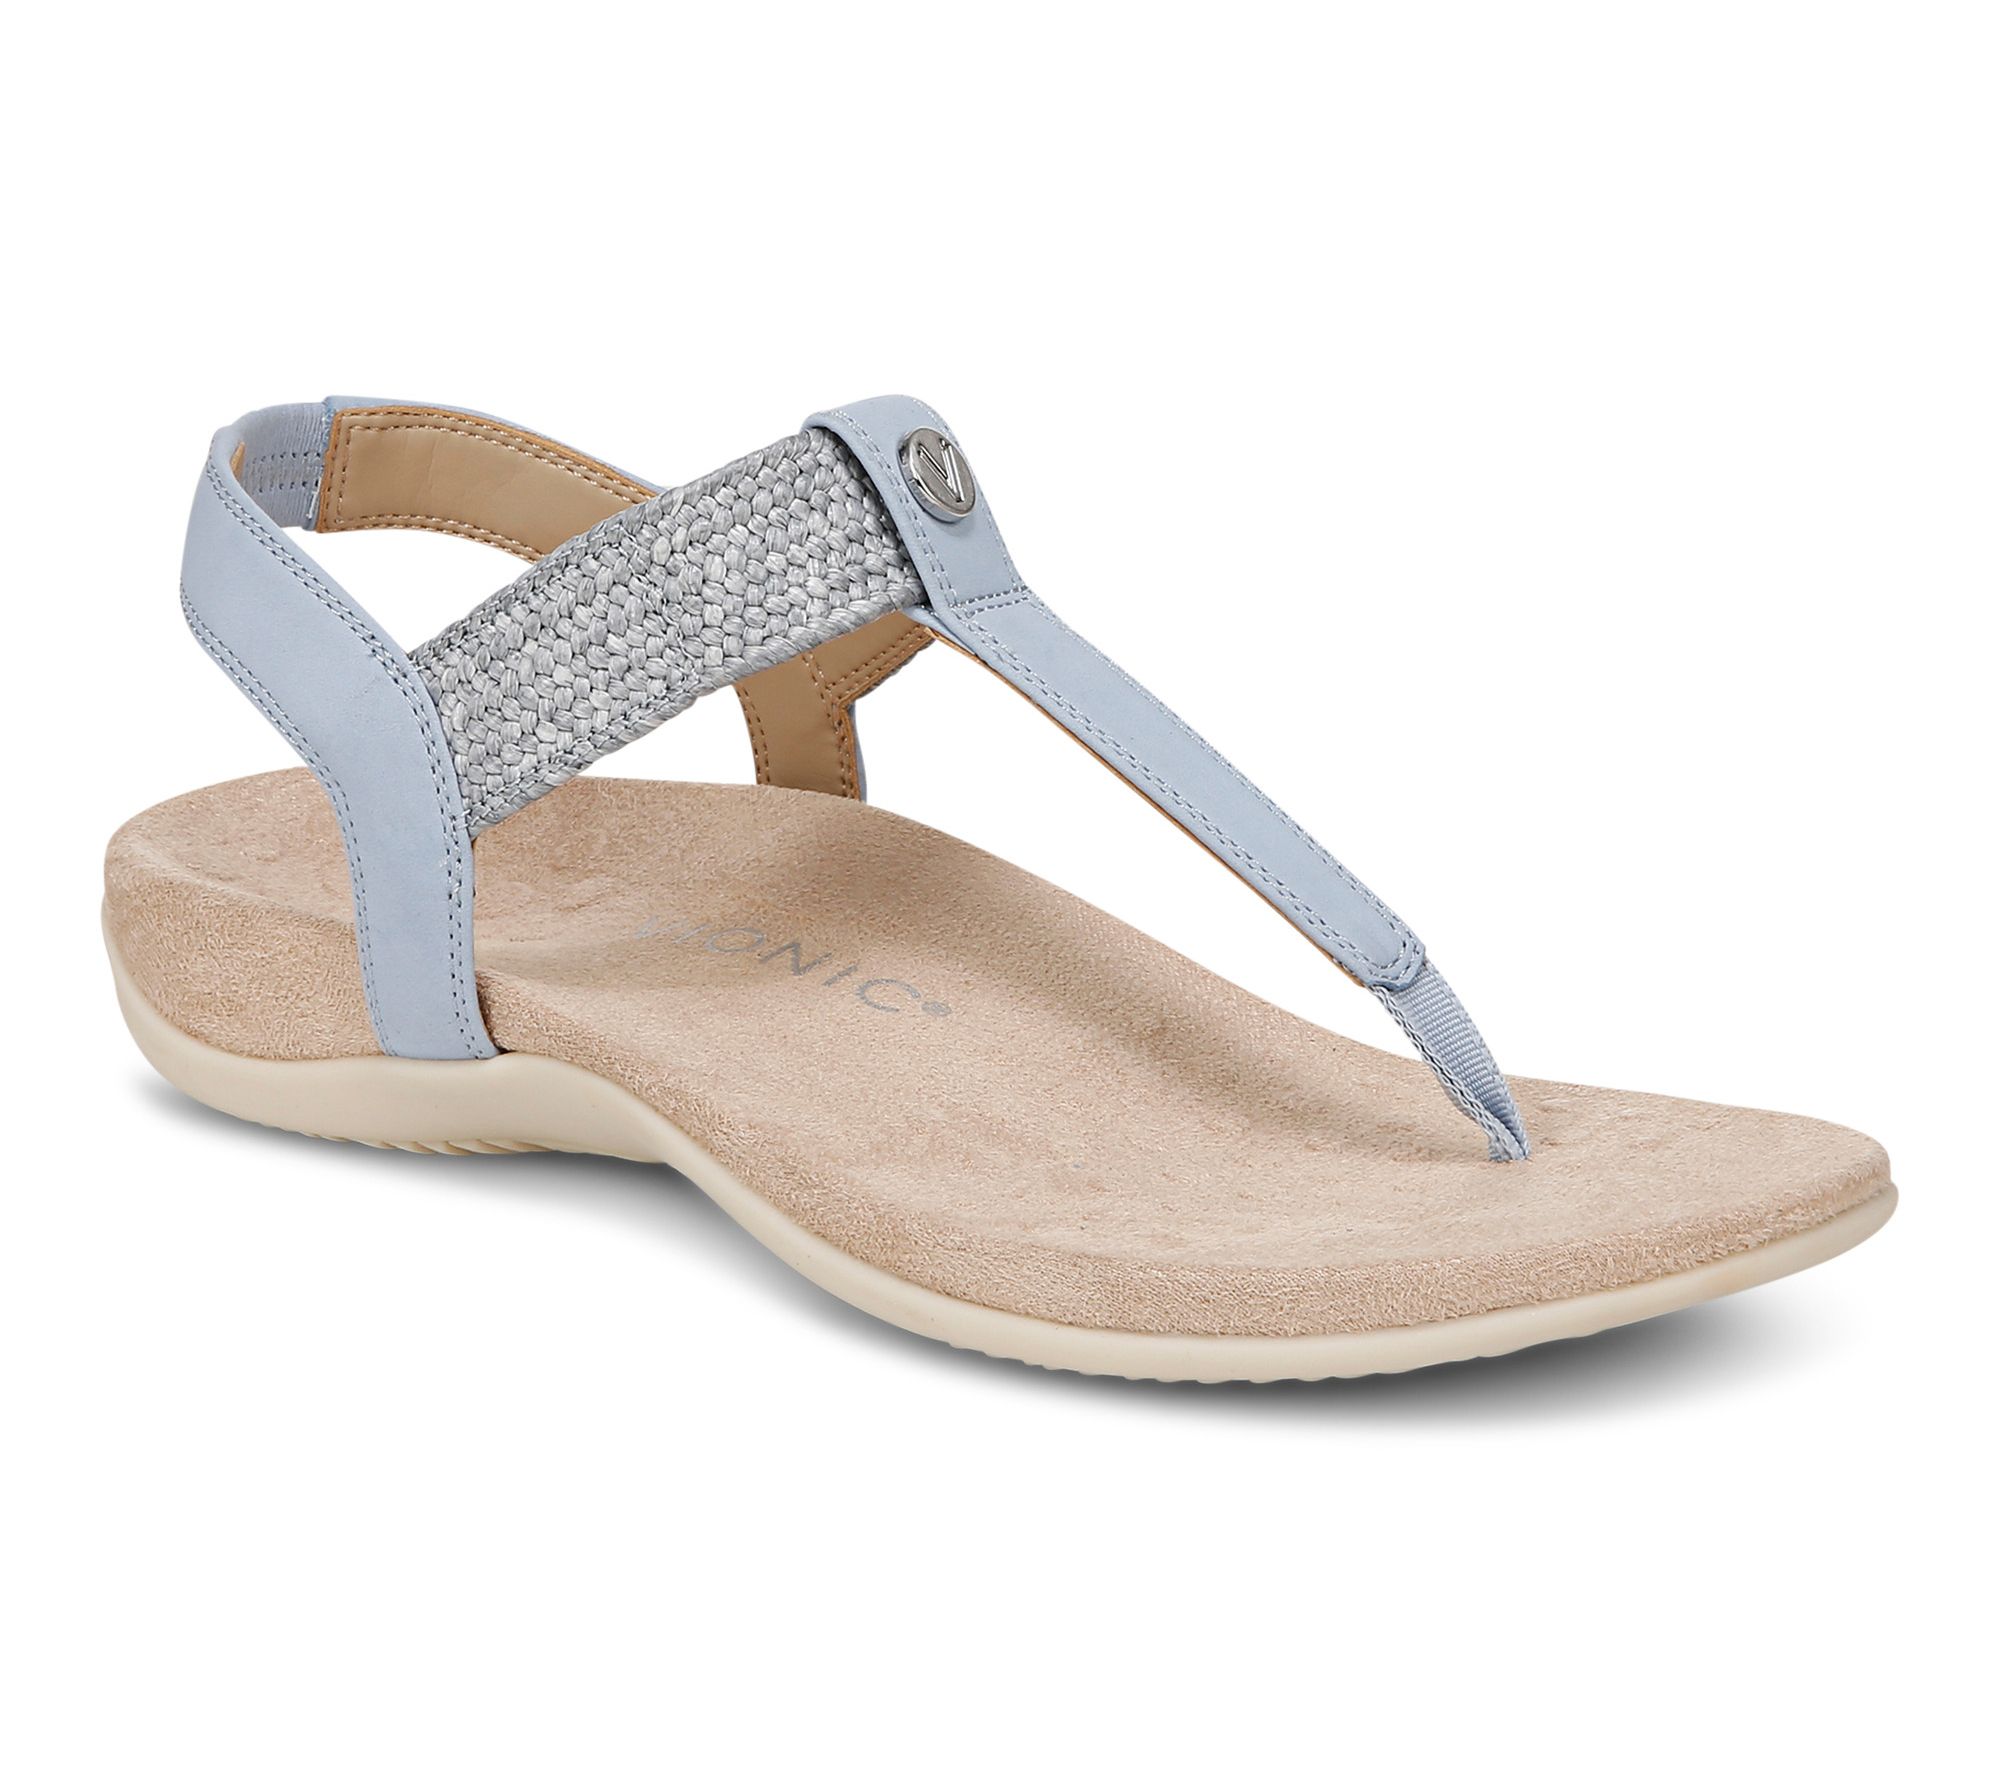 Vionic Patent Leather Thong Sandals - Tide Sport 